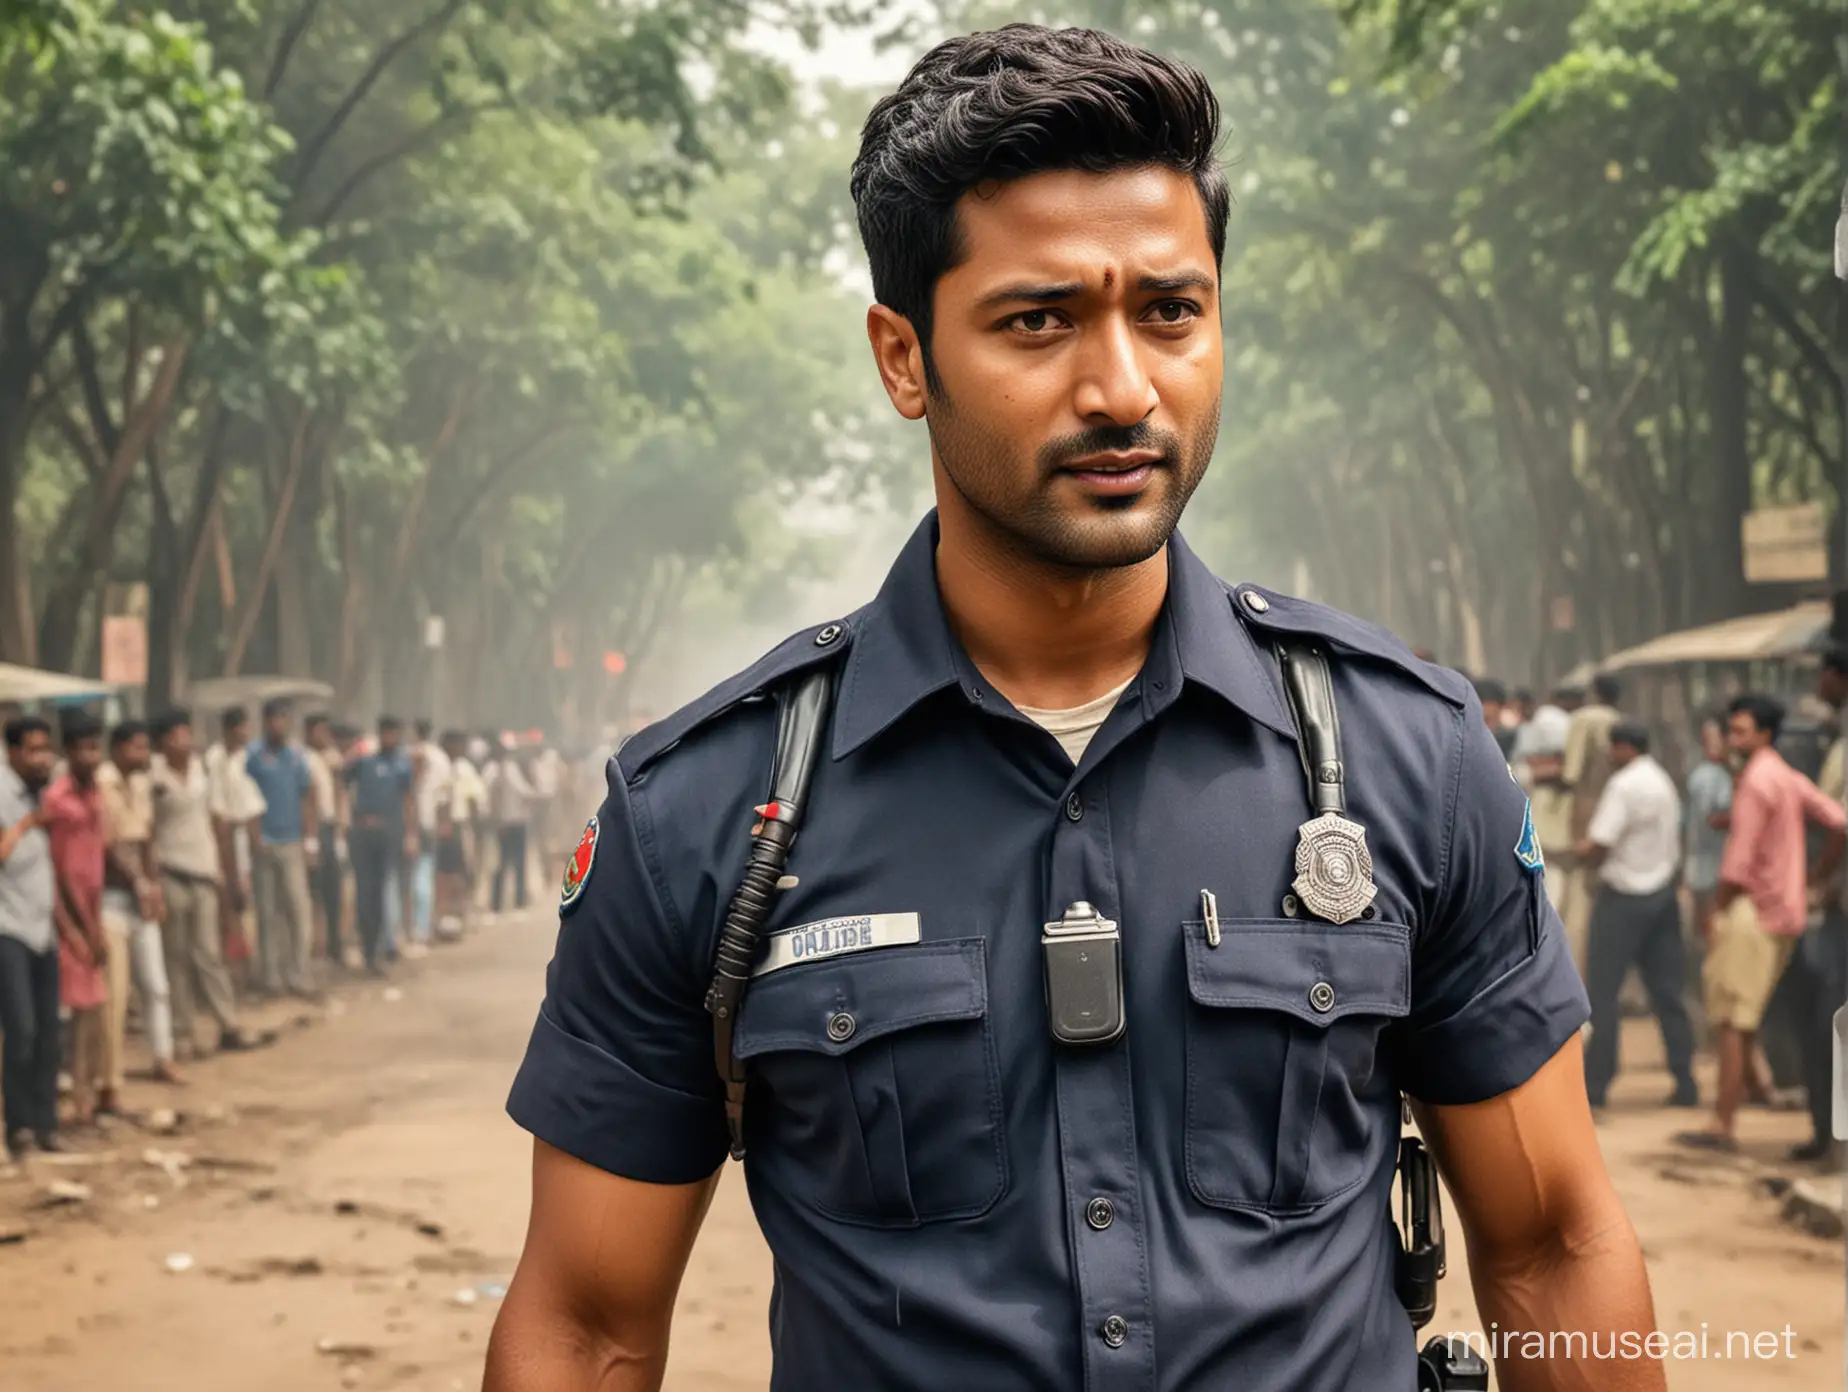 Vicky Kaushal as a dashing look police officer in Kolkata. He has a pistol in his hand and is ready to shoot